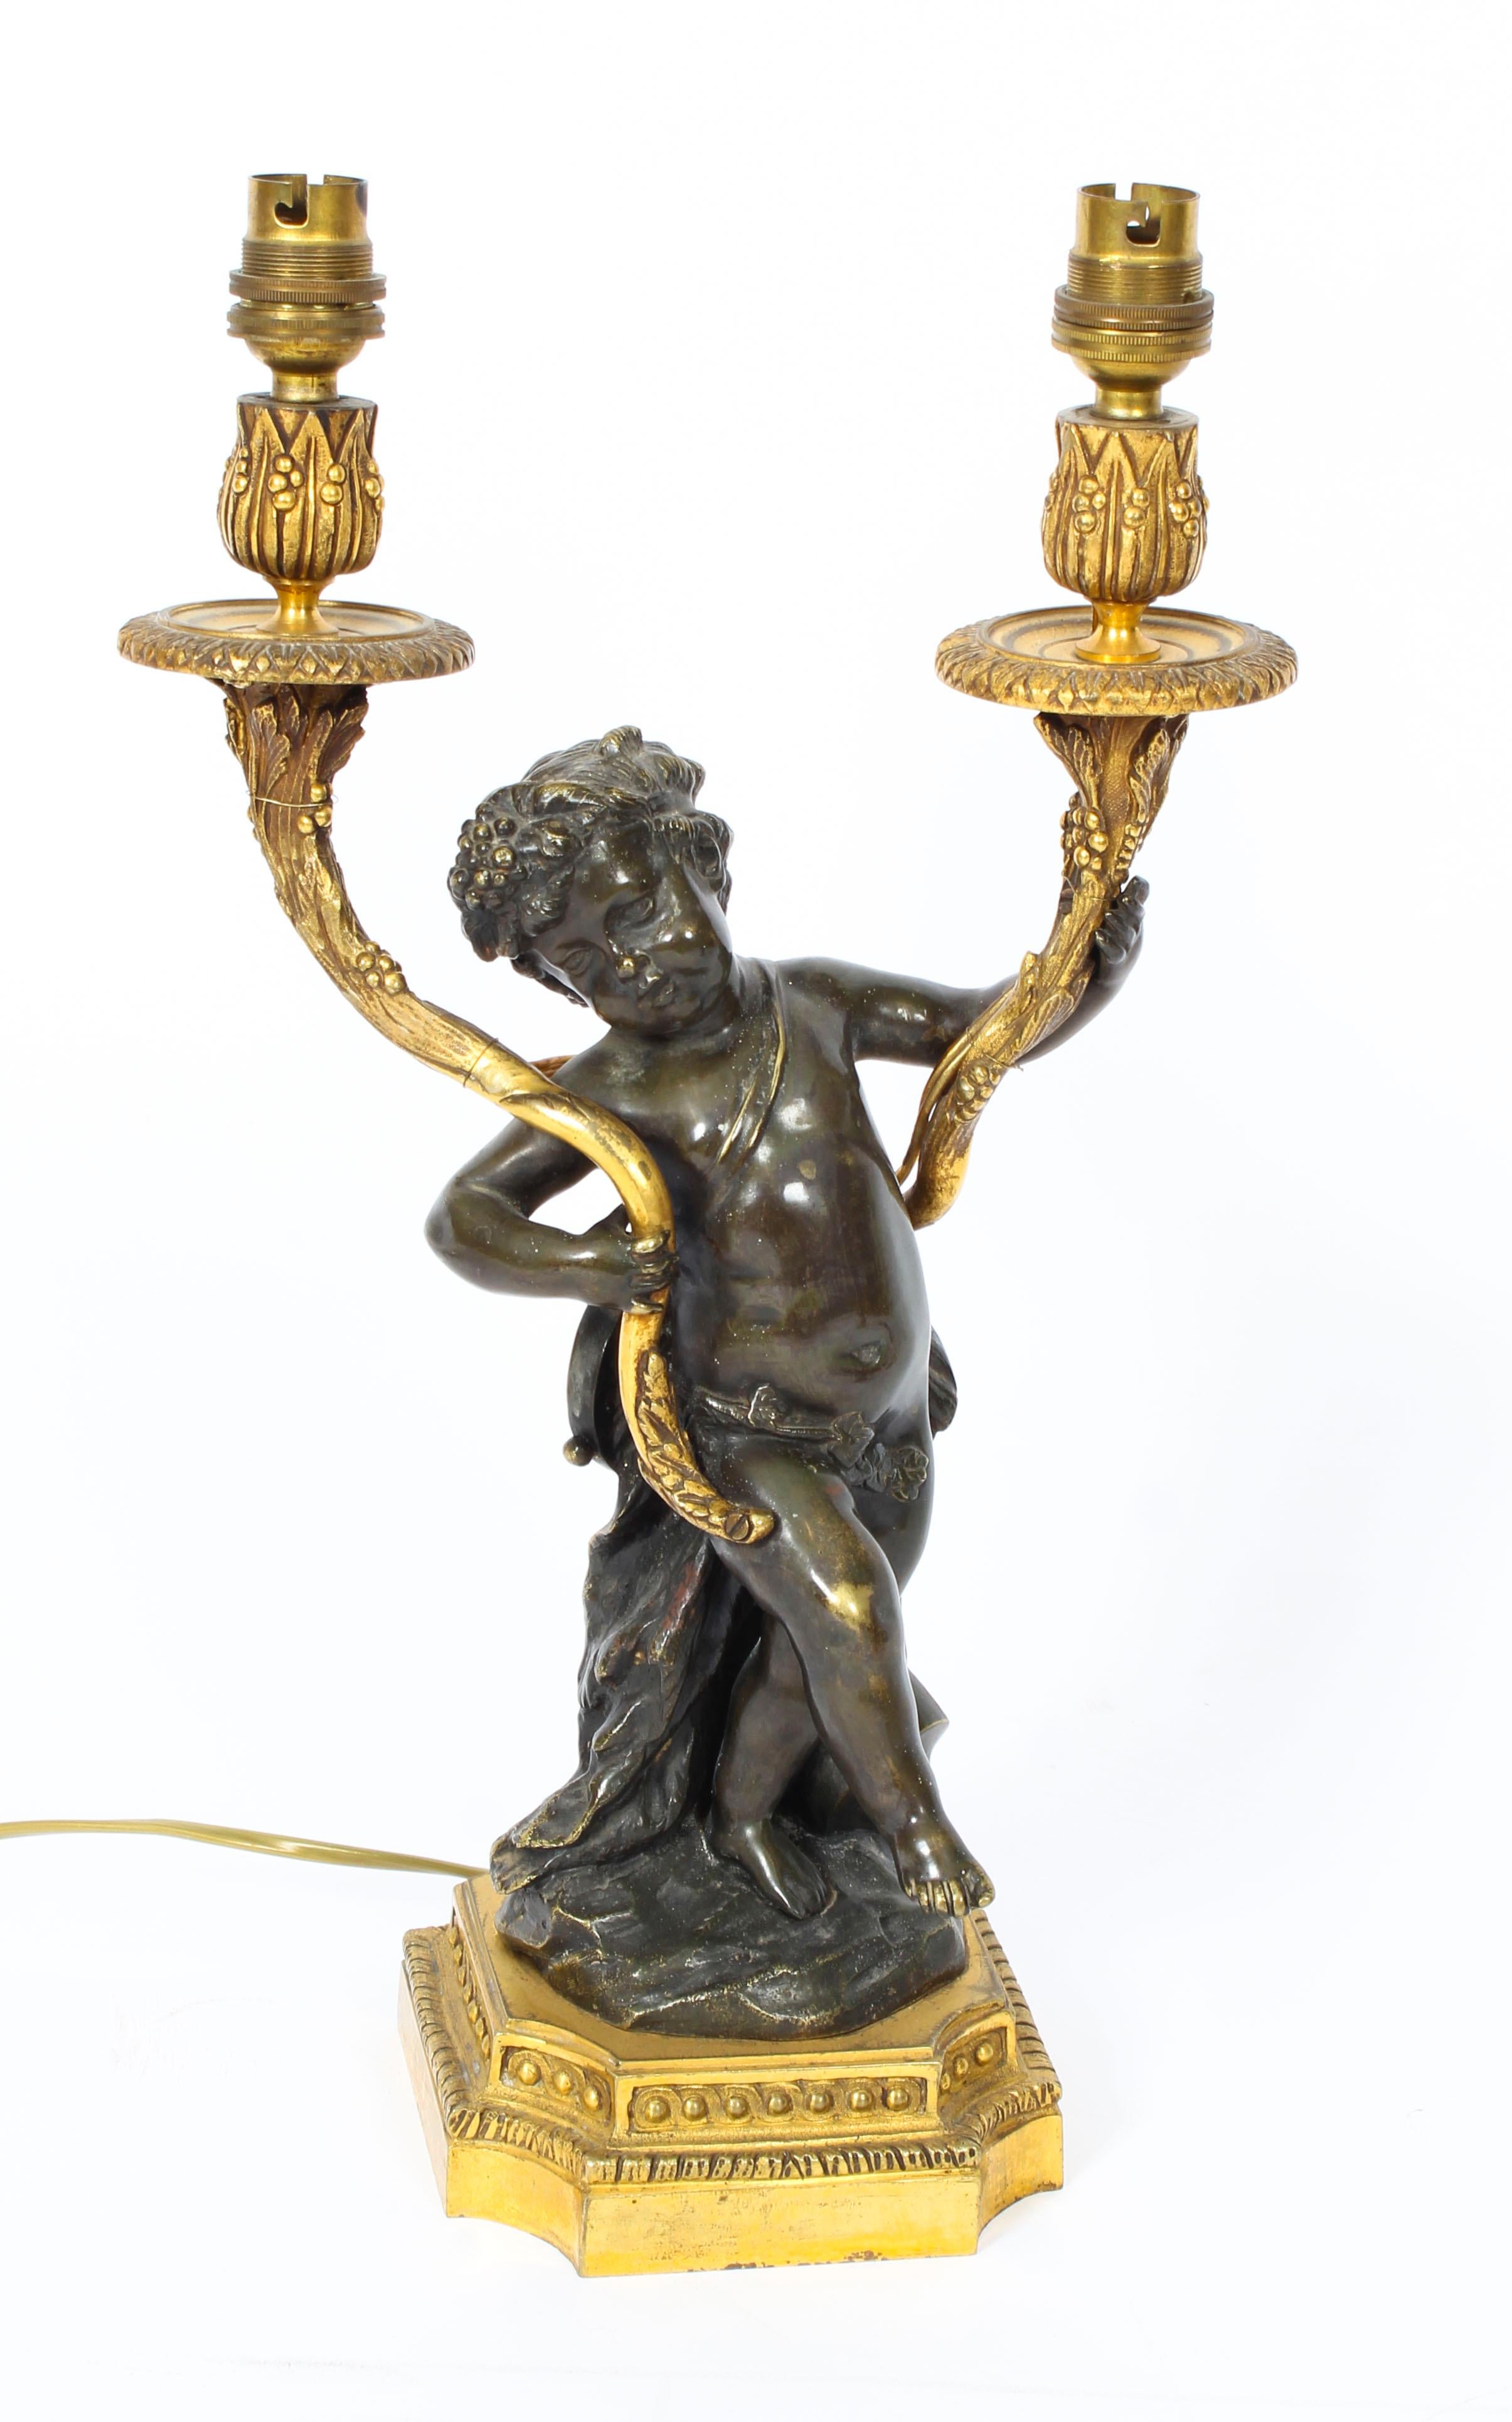 A magnificent antique pair of French ormolu and patinated bronze two light table lamps, circa 1860 in date.

They are superbly decorated with foliate scrolls and stunning patinated bronze Bacchic cherubs holding cornucopia shaped arms decorated